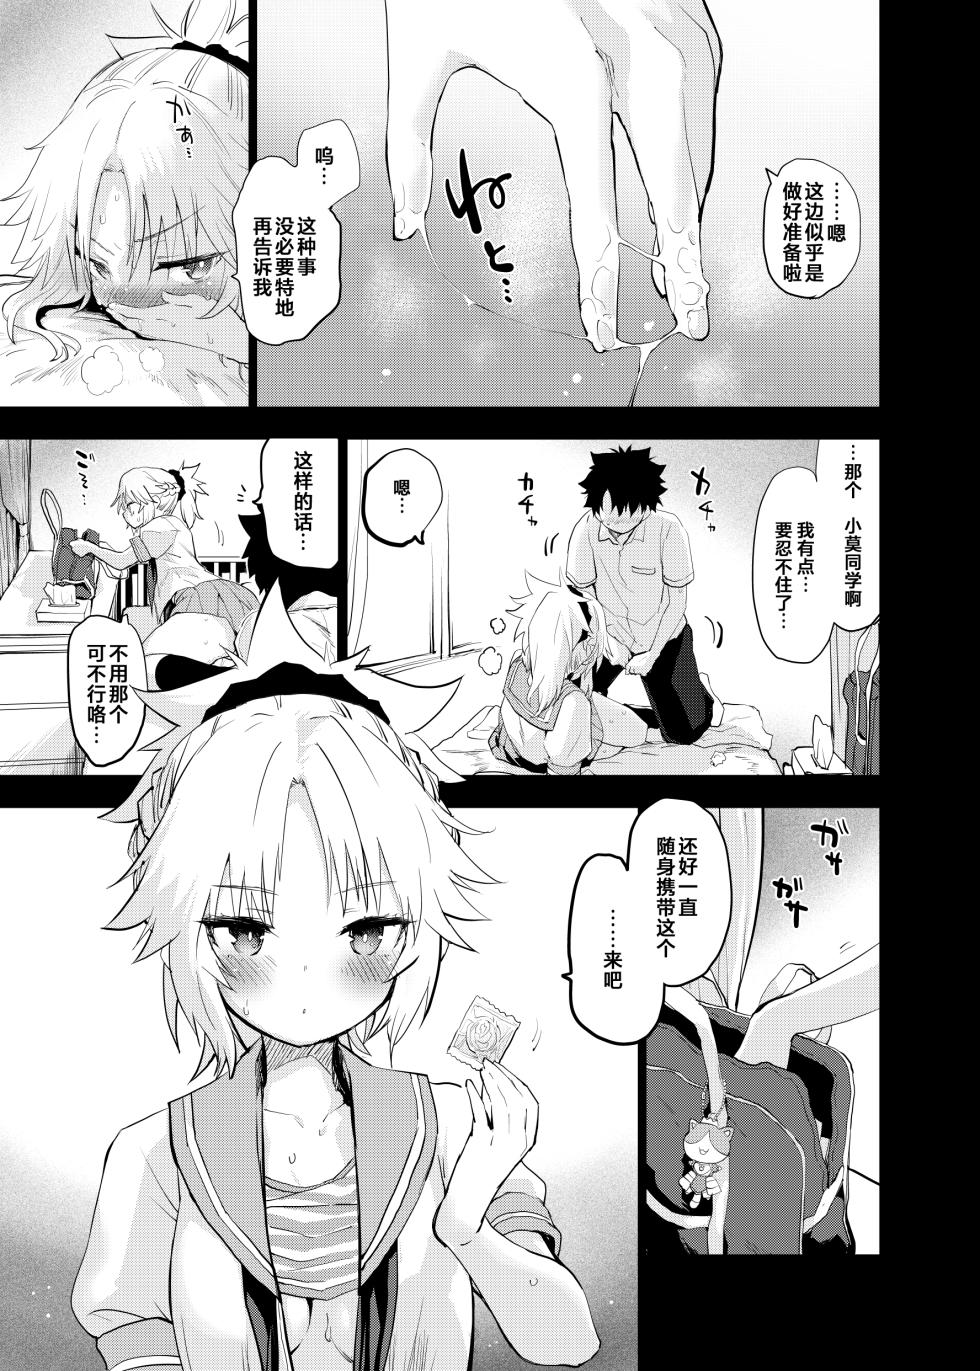 [Peθ (Mozu)] ApocryFucking' School Life Collabo Event <ROUTE: MORDRED> | ApocryFucking' 校园生佸合作活动 <ROUTE: MORDRED> (Fate/Grand Order) [Chinese] [Digital] - Page 9